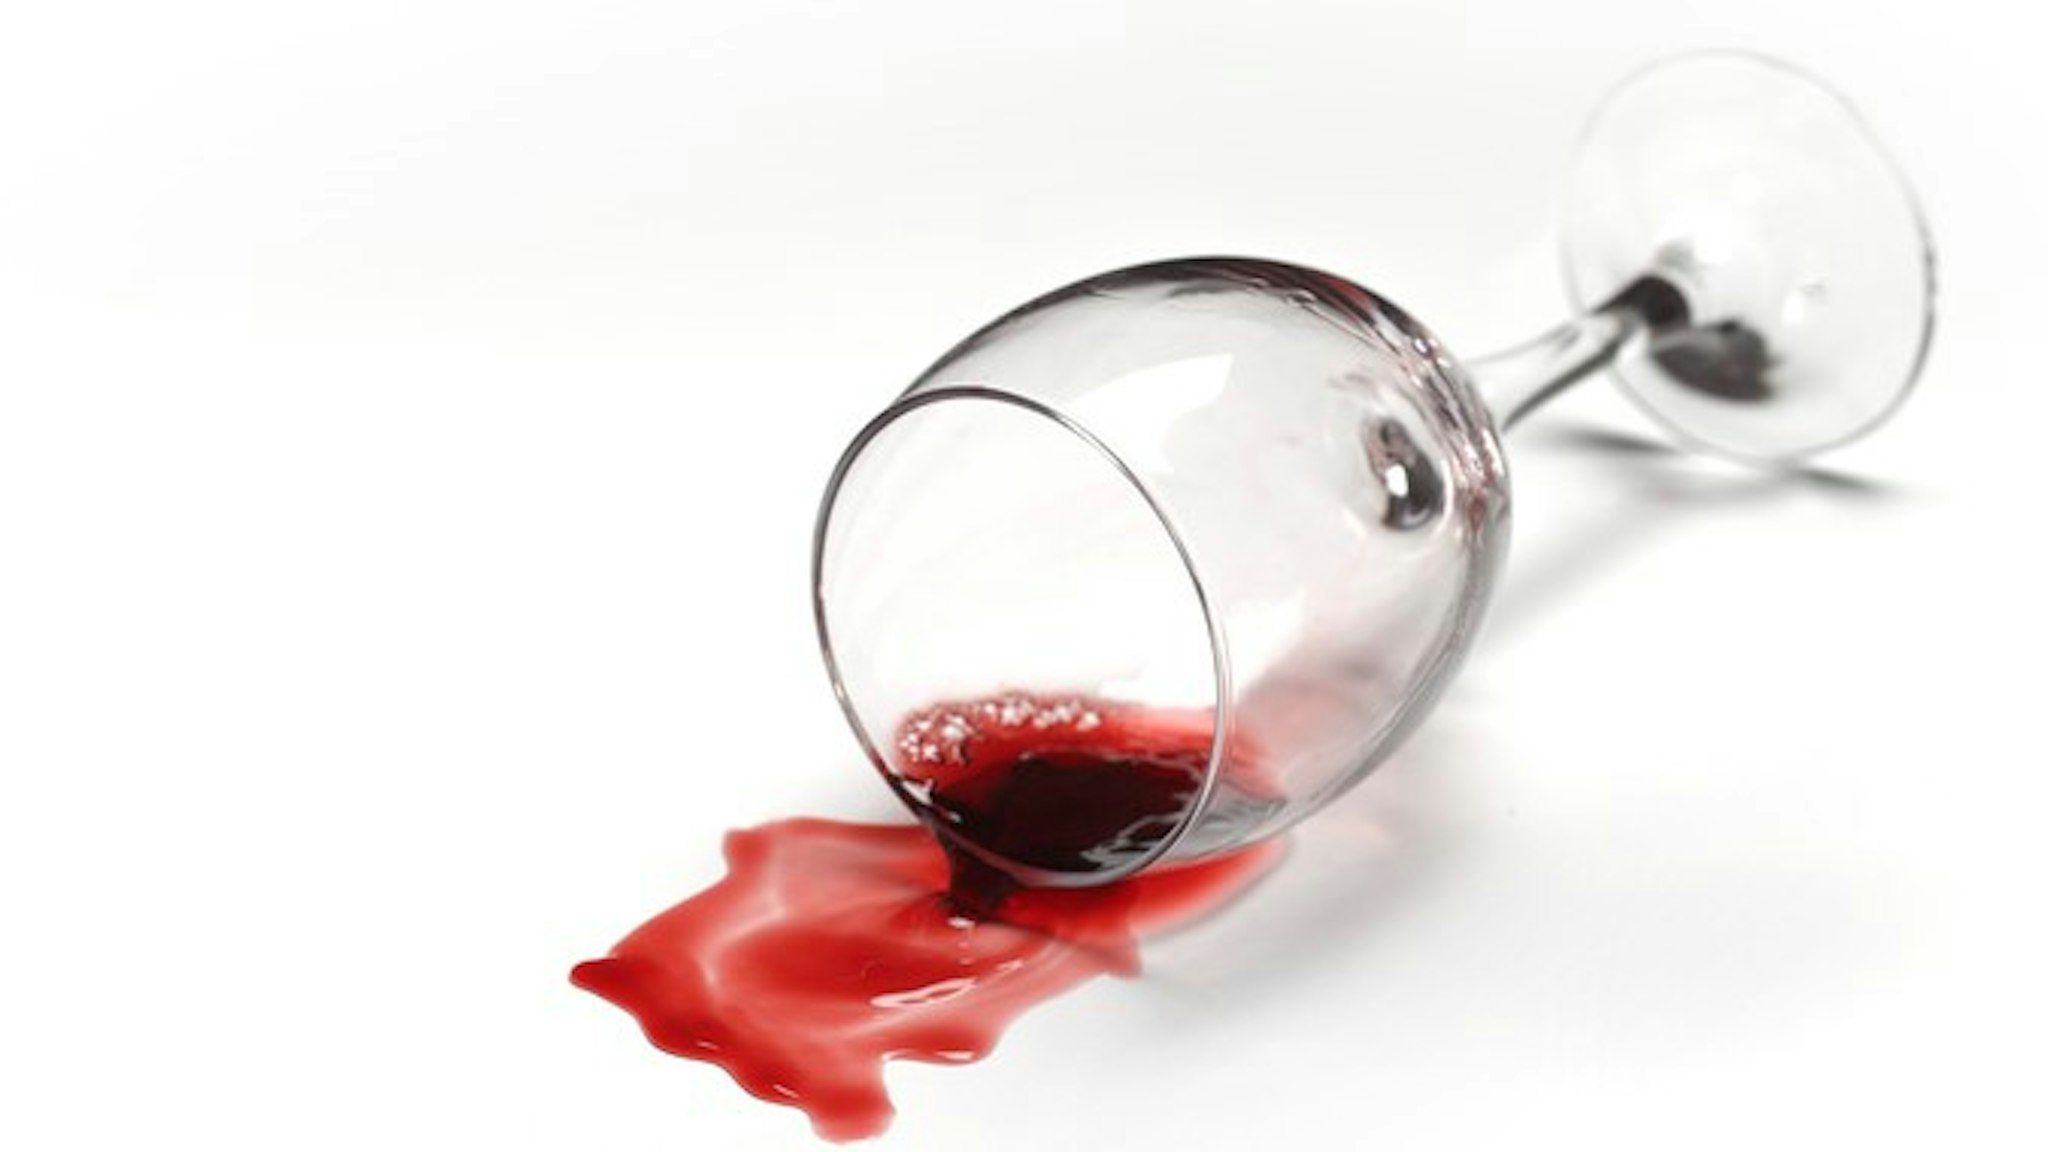 GLASS OF RED WINE KNOCKED OVER